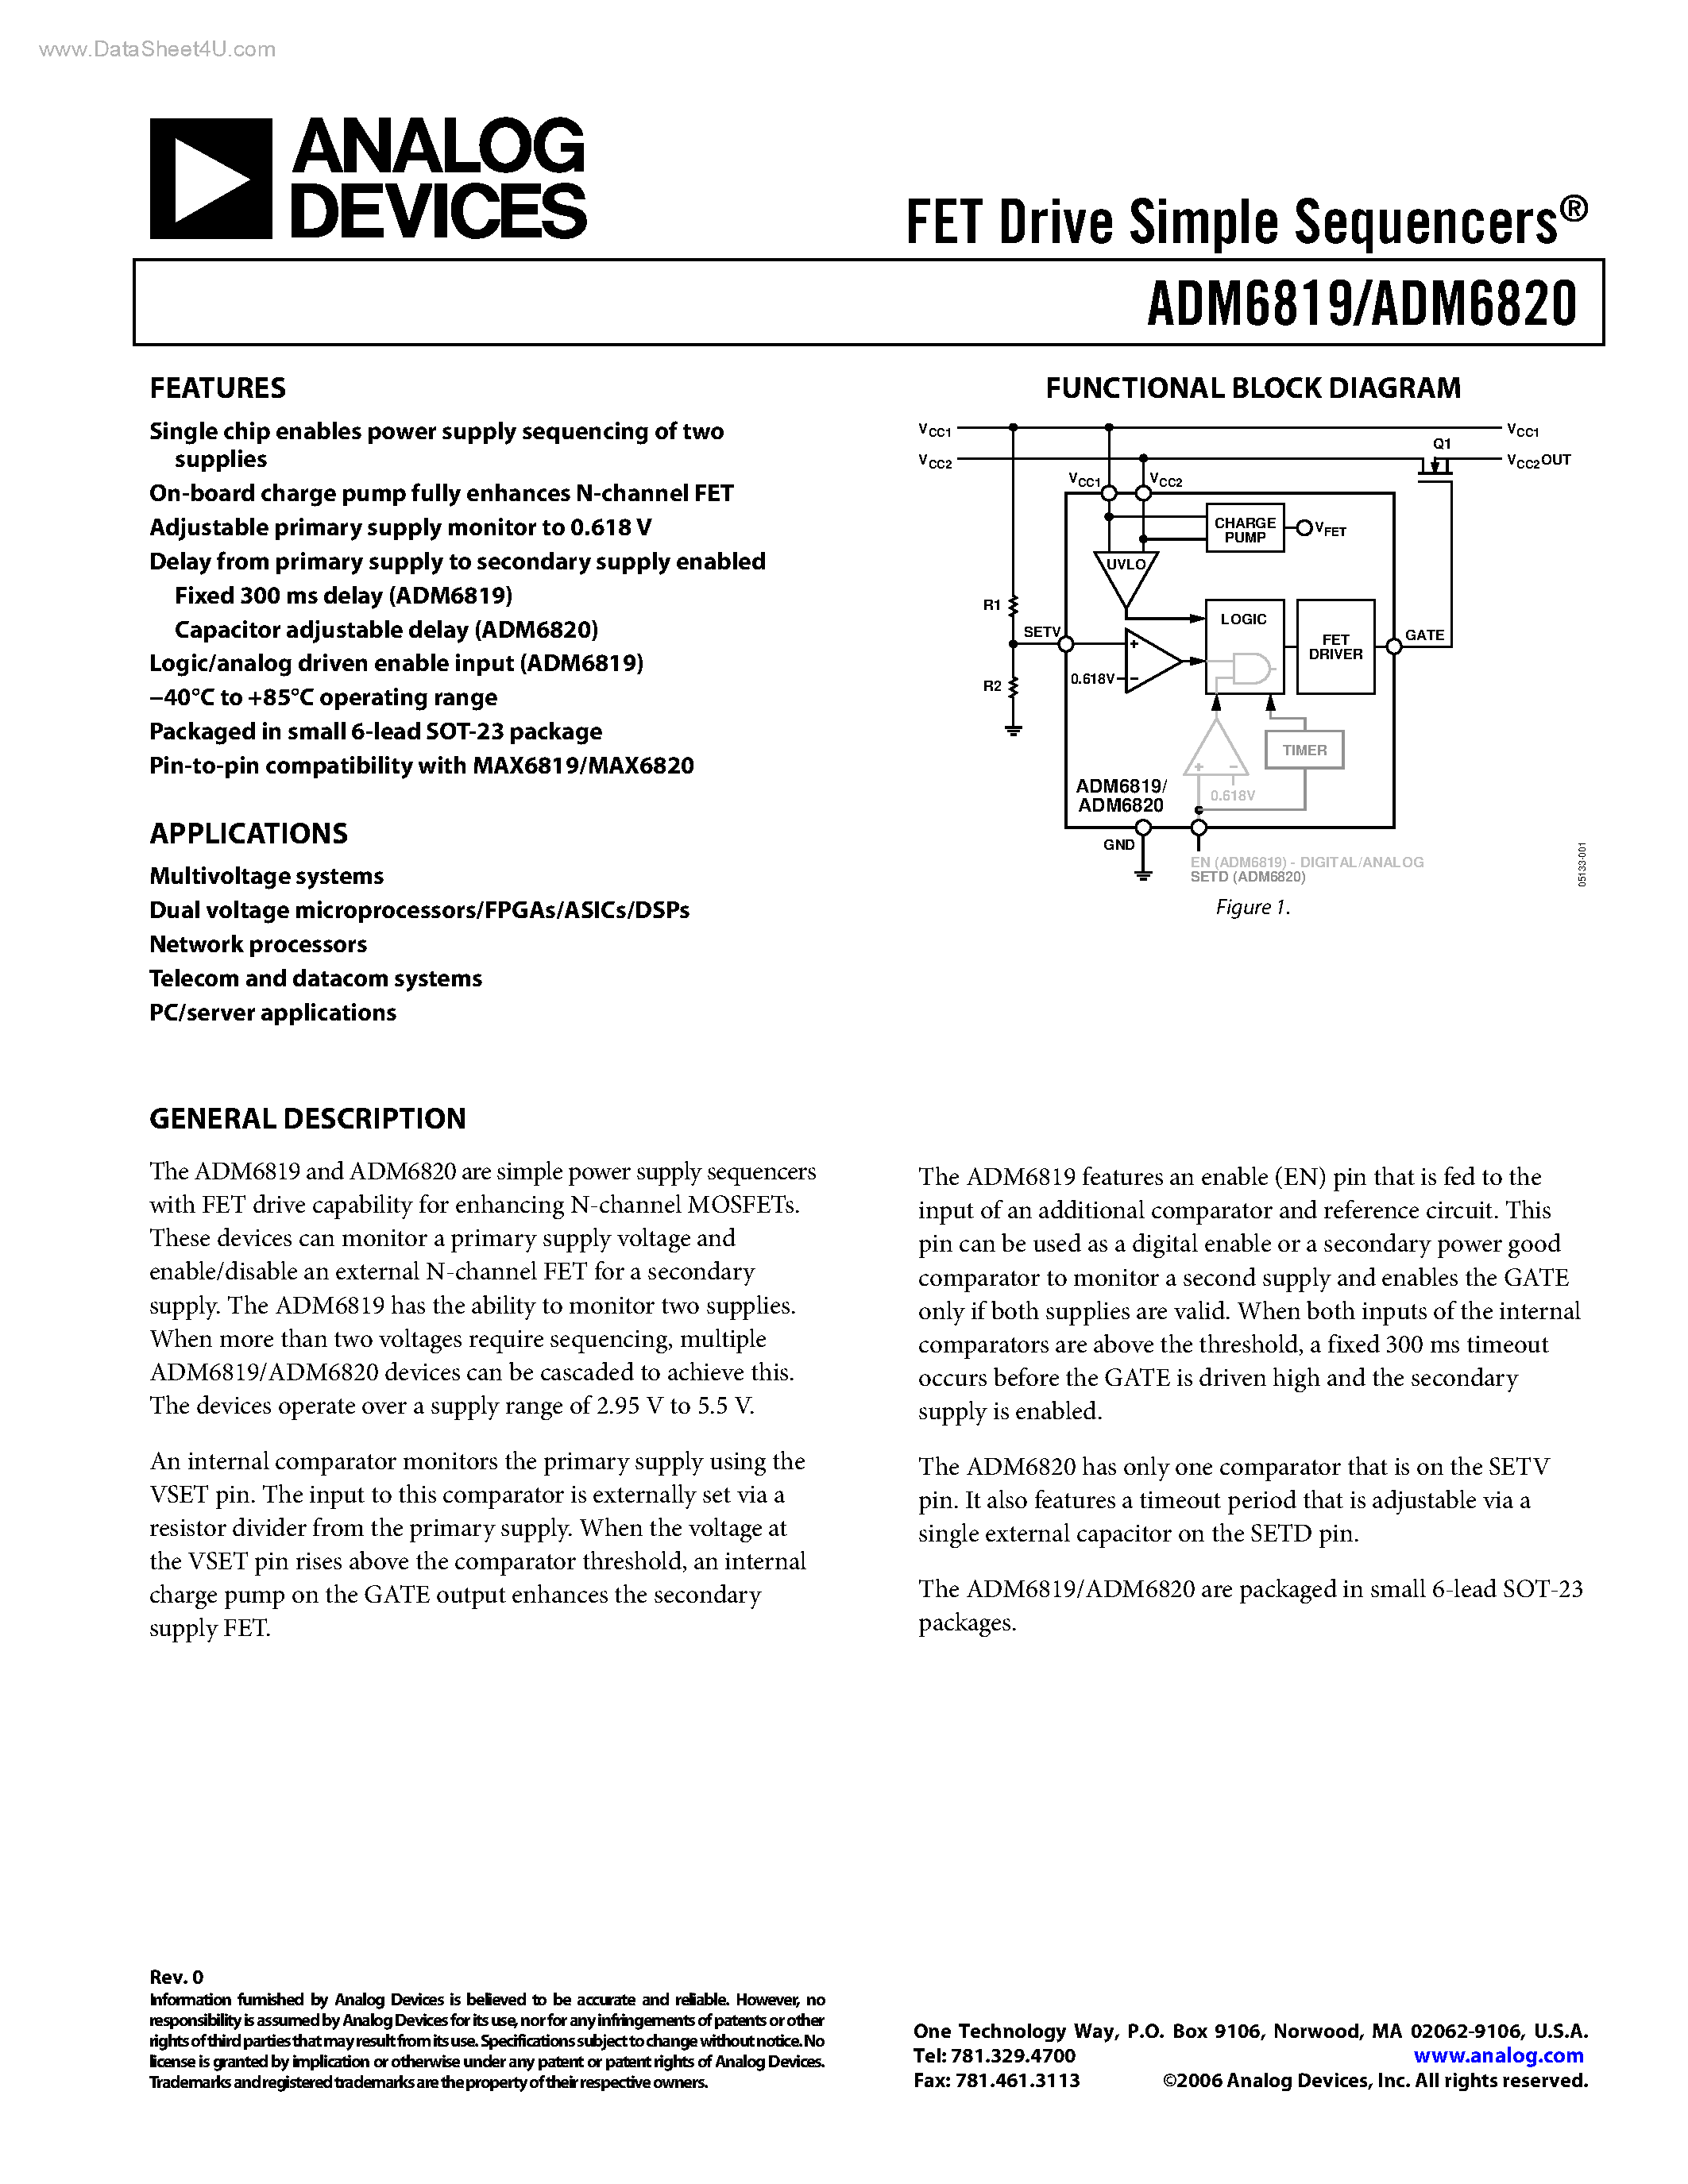 Datasheet ADM6819 - (ADM6819 / ADM6820) FET Drive Simple Sequencers page 1